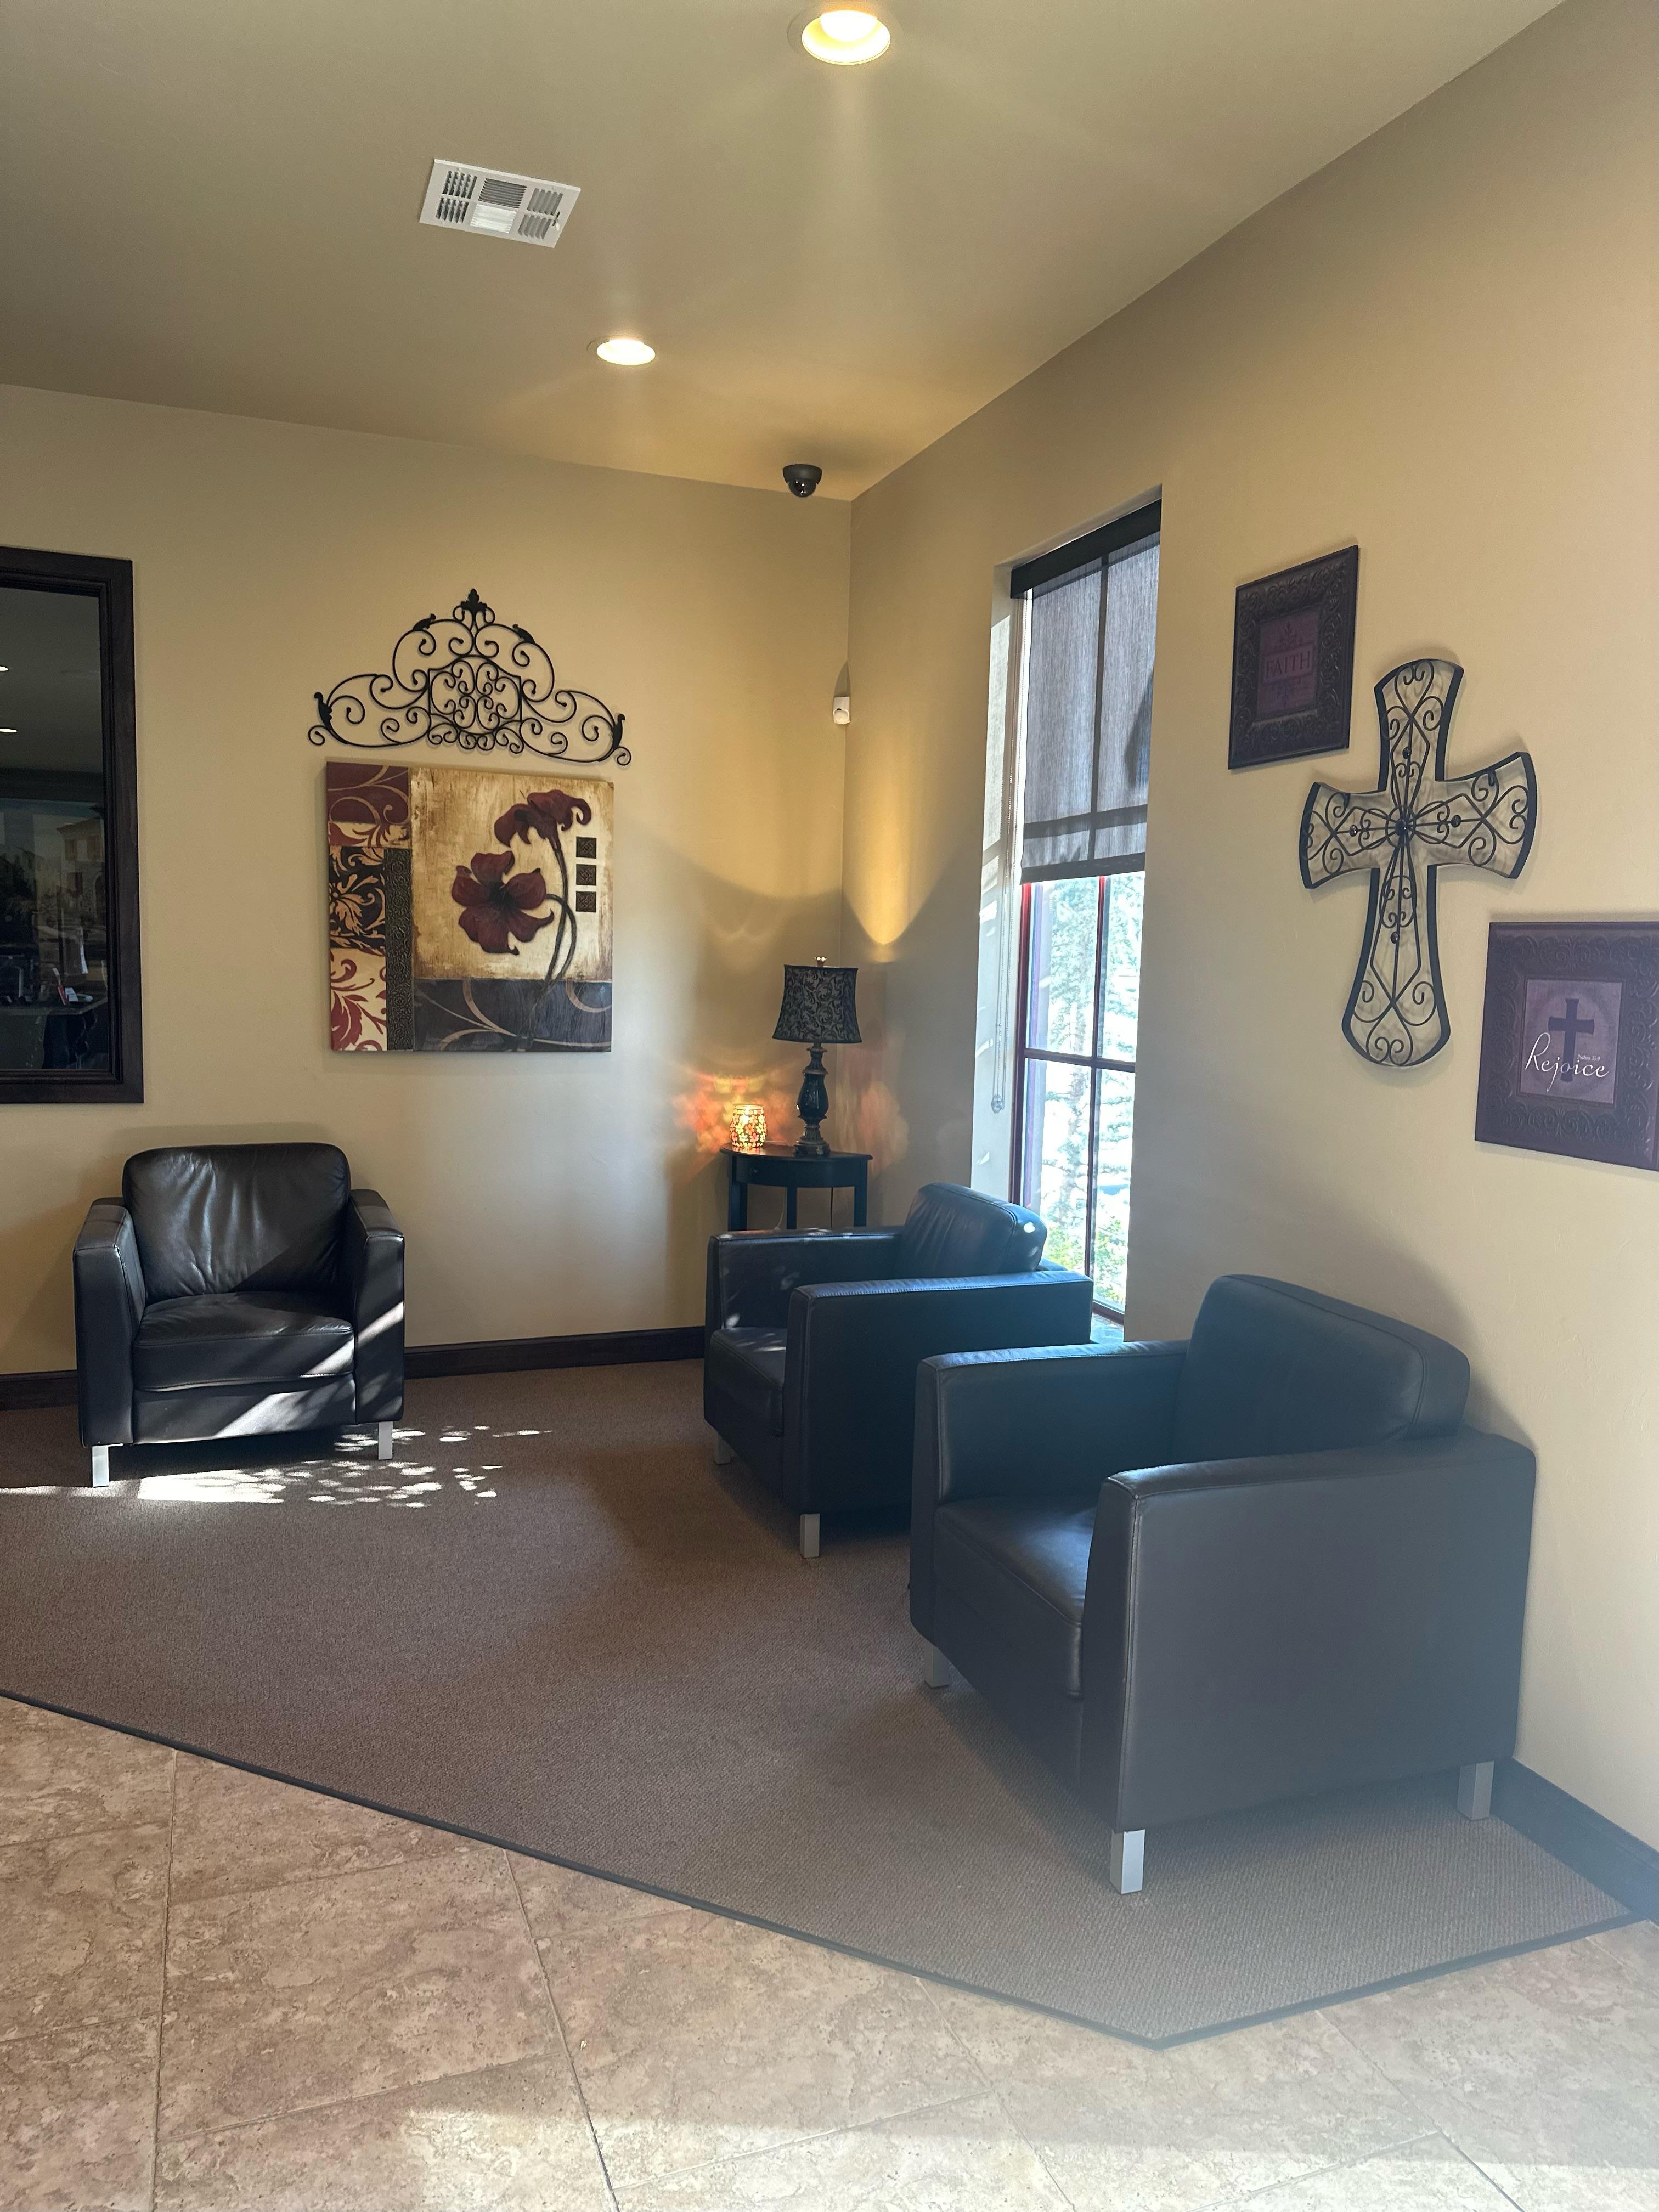 Make yourself comfortable in our waiting room!